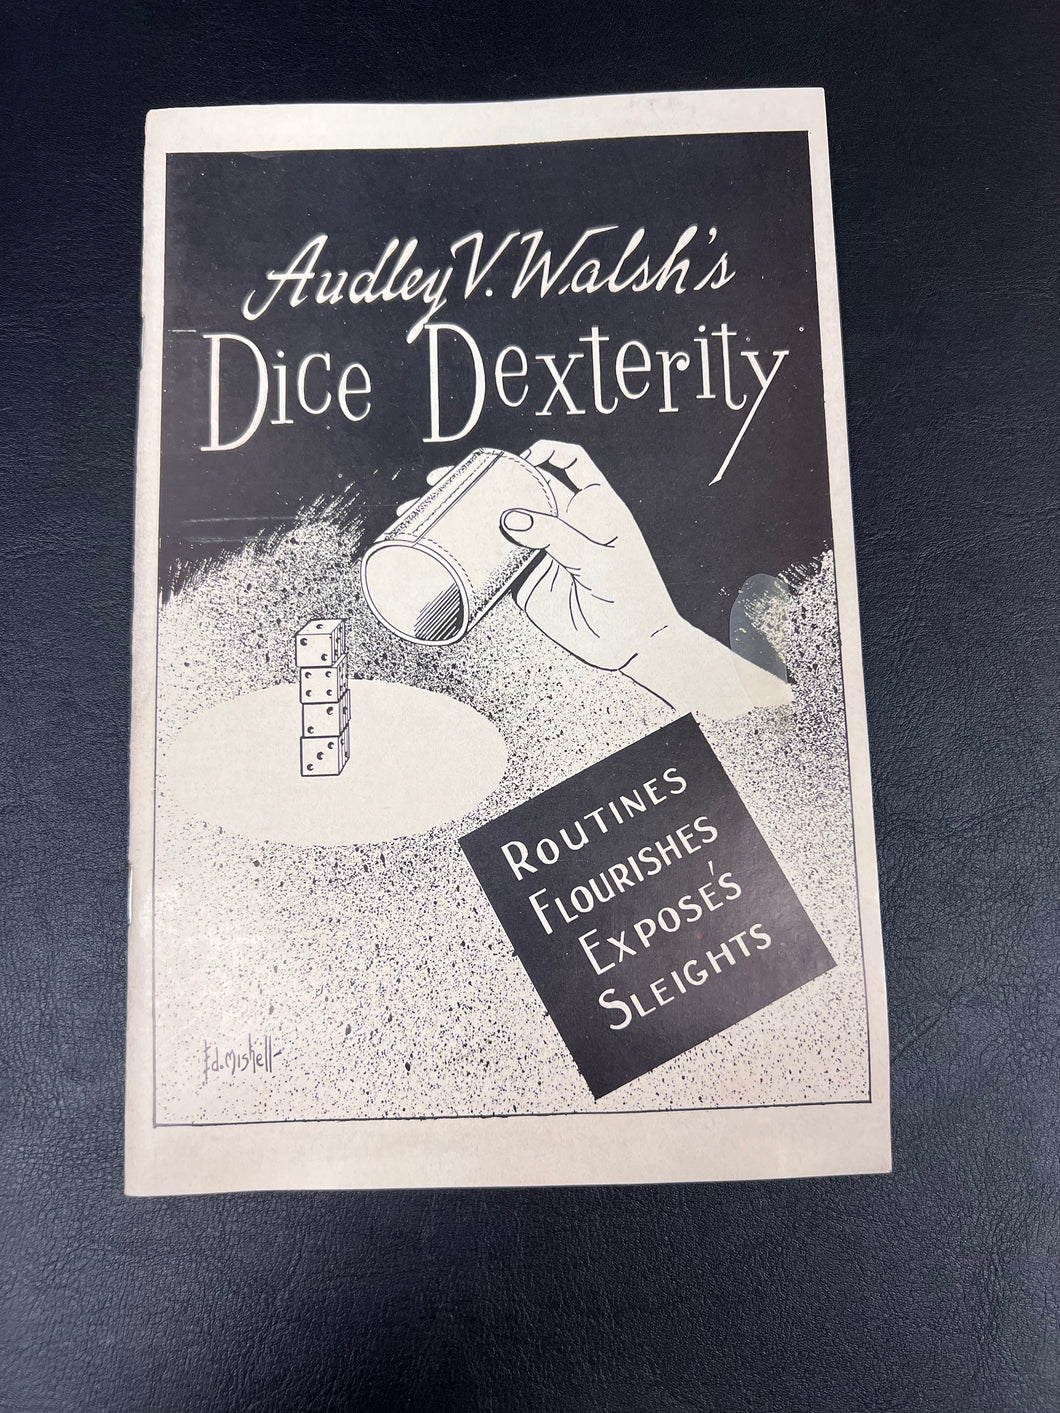 Audley V. Walsh's Dice Dexterity